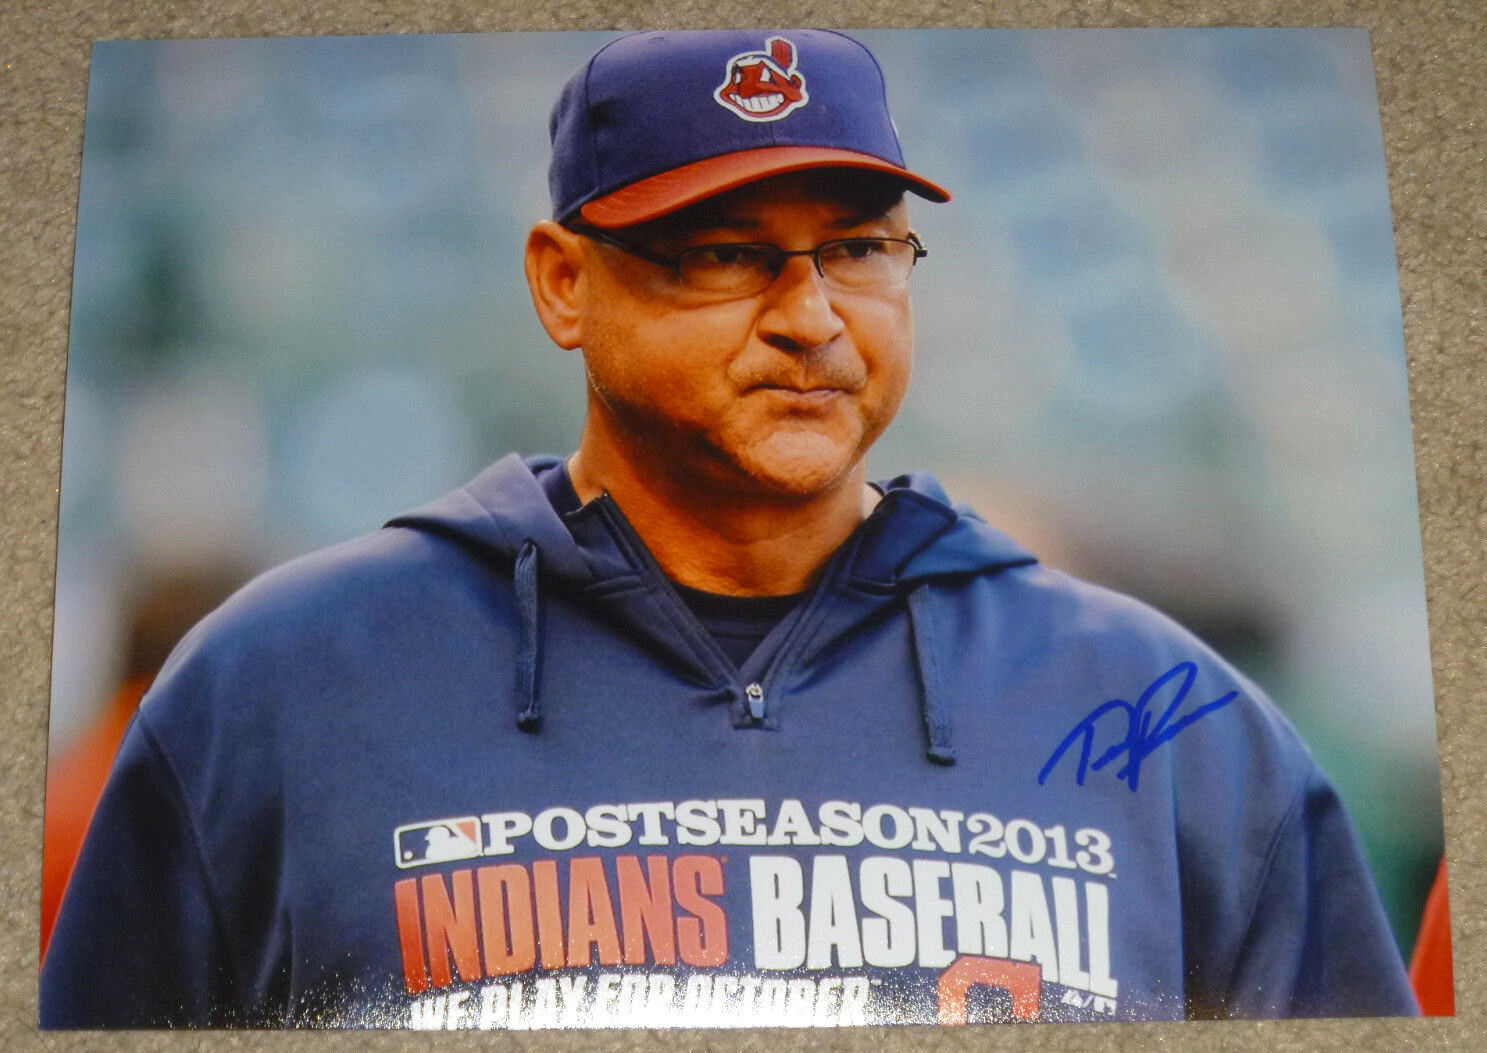 Terry Francona Authentic Signed 8x10 MLB Photo Poster painting Autographed, Cleveland Indians